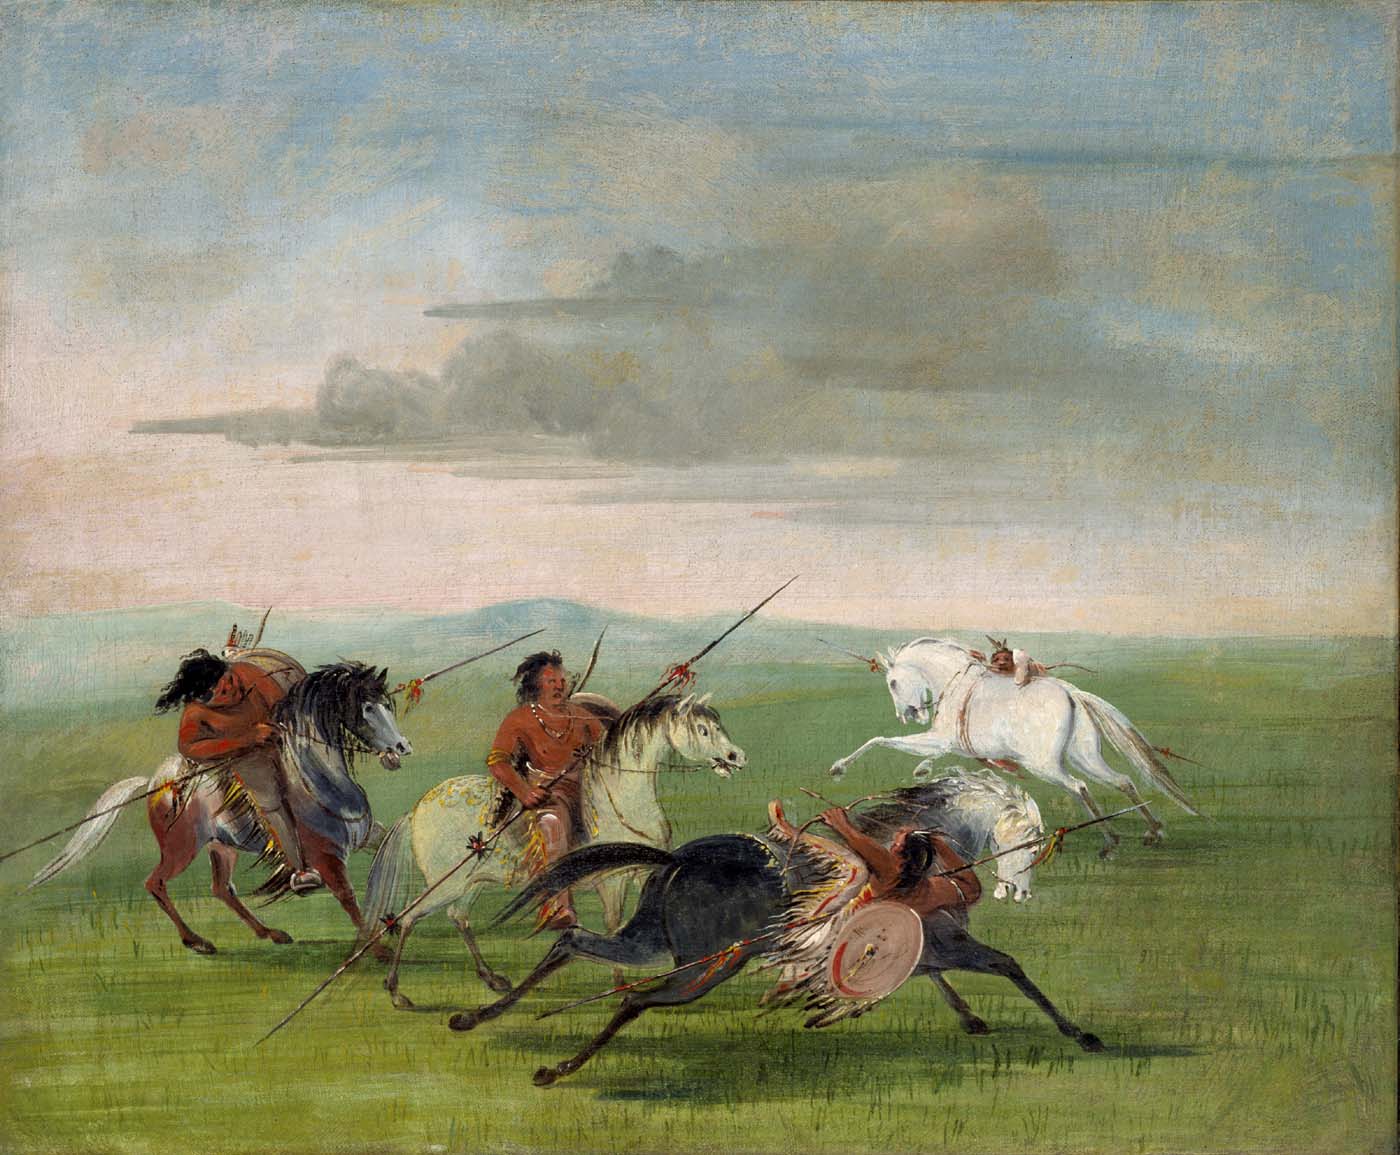 a painting of a group of men on horses.